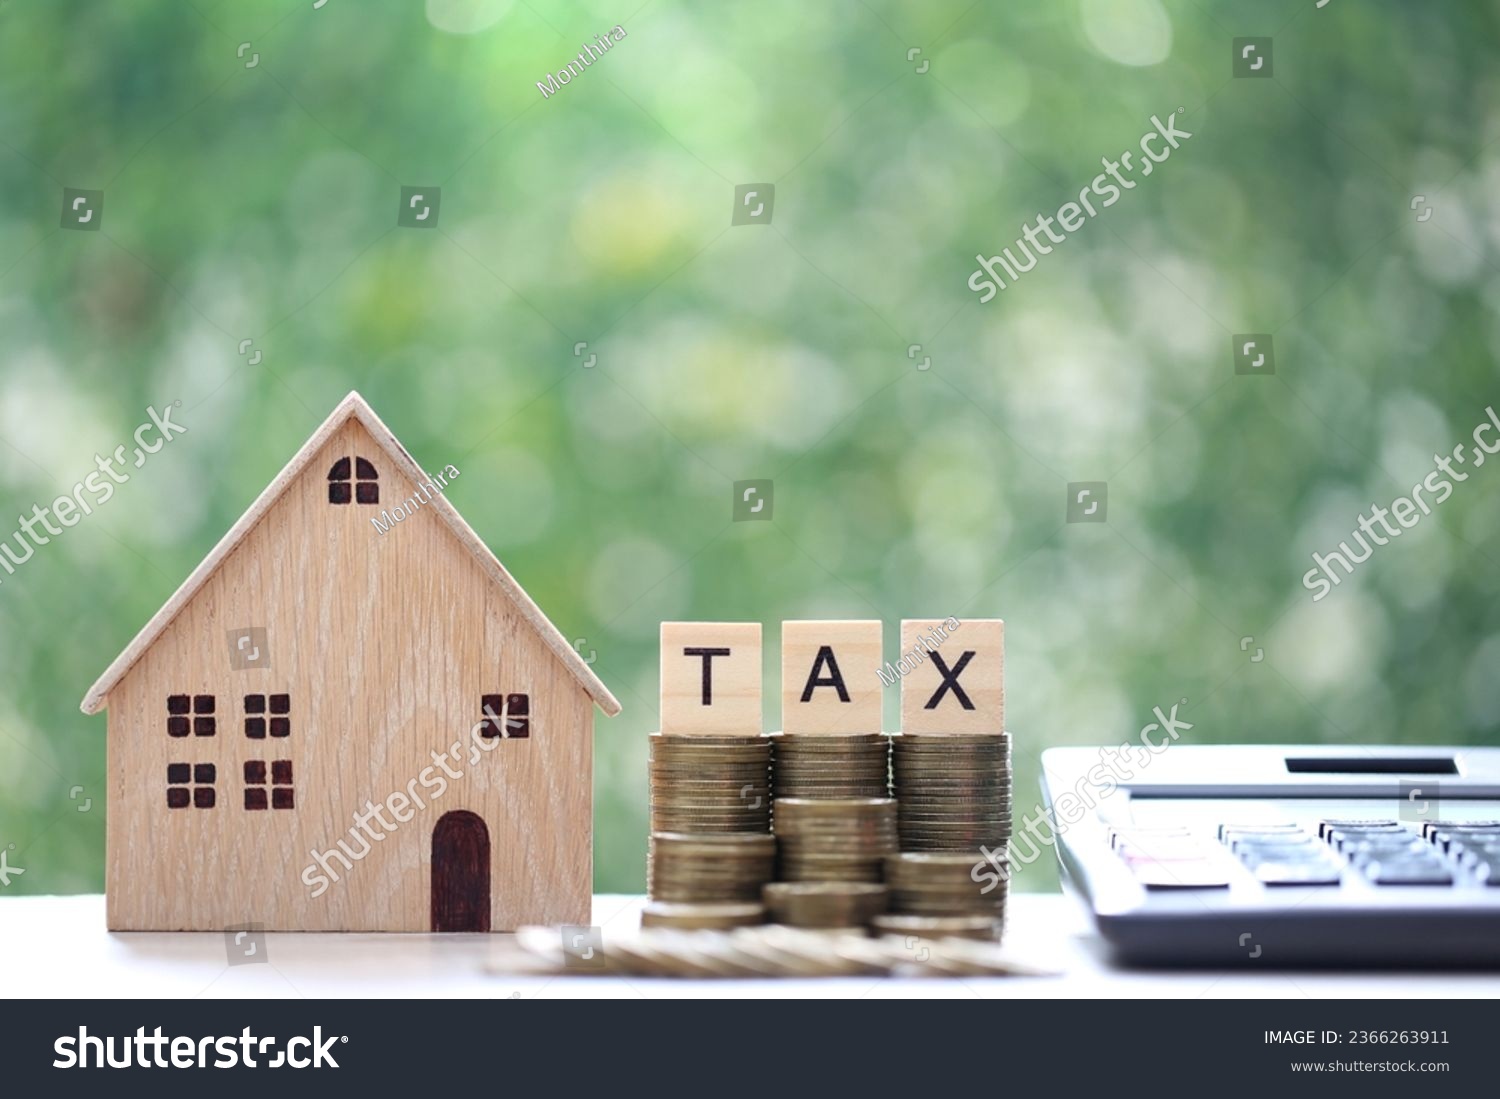 Tax concept,Model house with stack of coins money and tax word on green background,Business investment and Property tax concept #2366263911